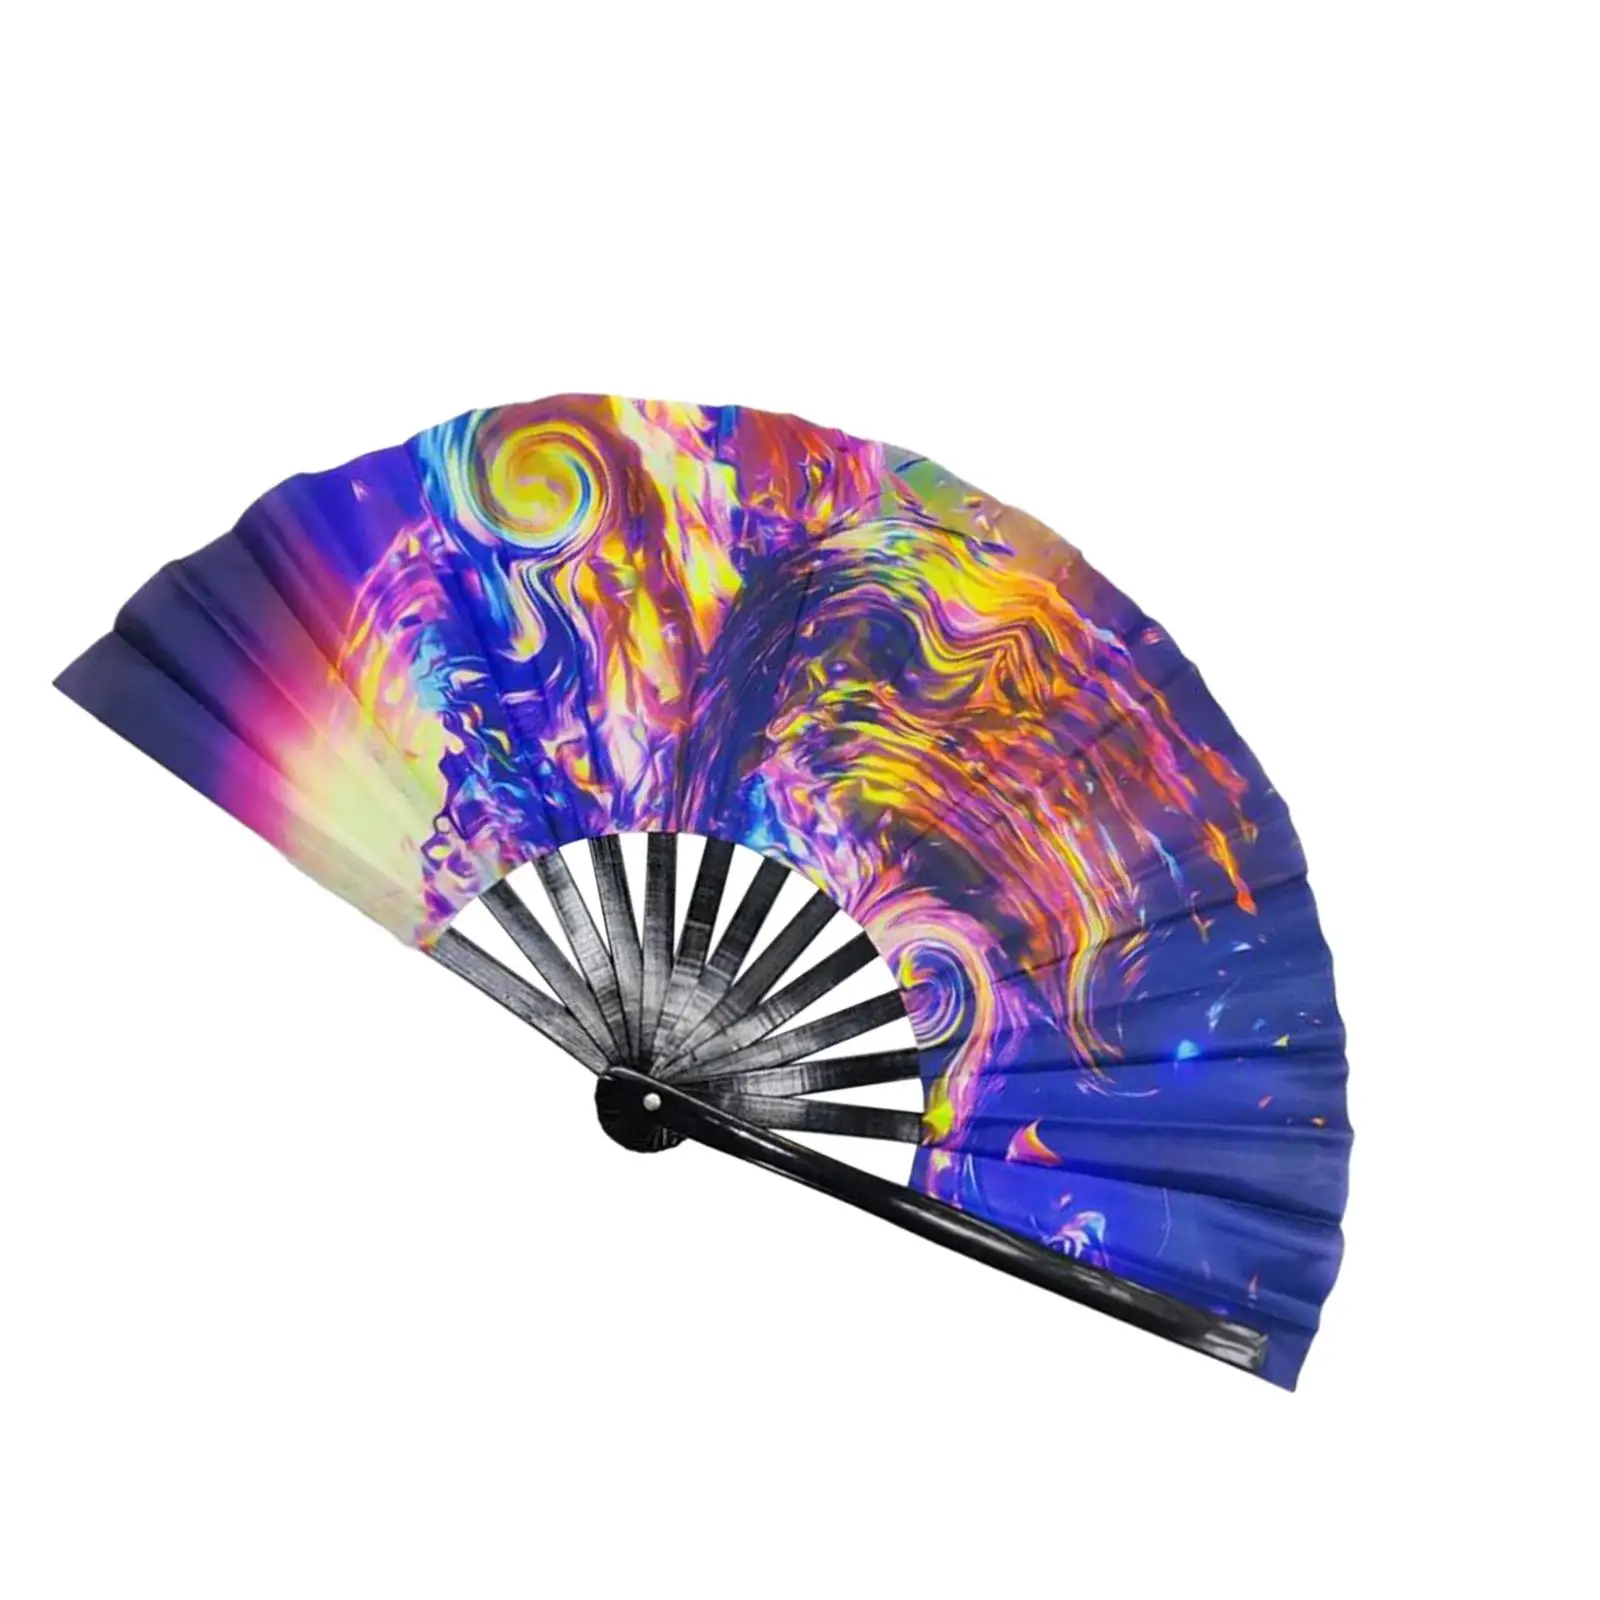 Rave Folding Hand Fan Fluorescent Effects Unisex Folding Fan for Masquerade Concerts Stage Show Performance Parties Roles Play